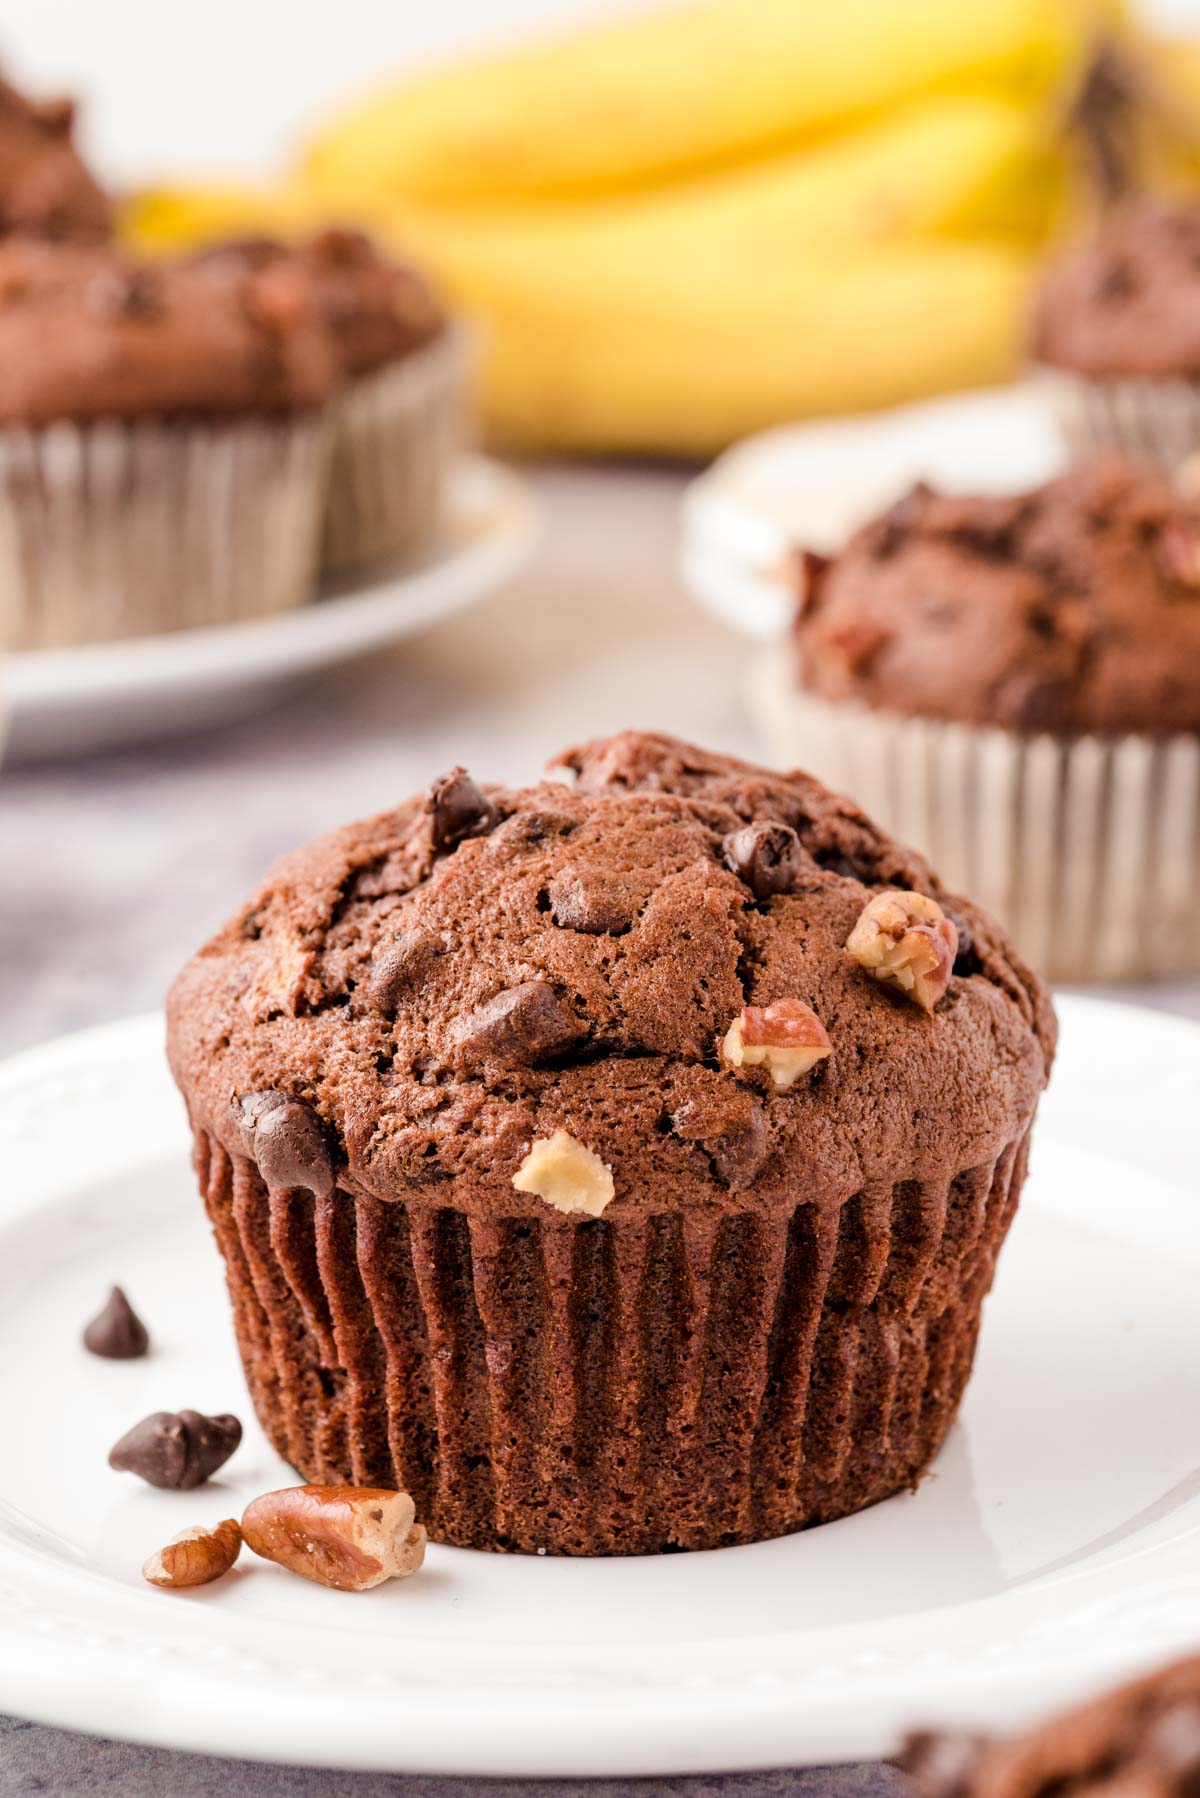 Chocolate Banana Muffins on a white plate.